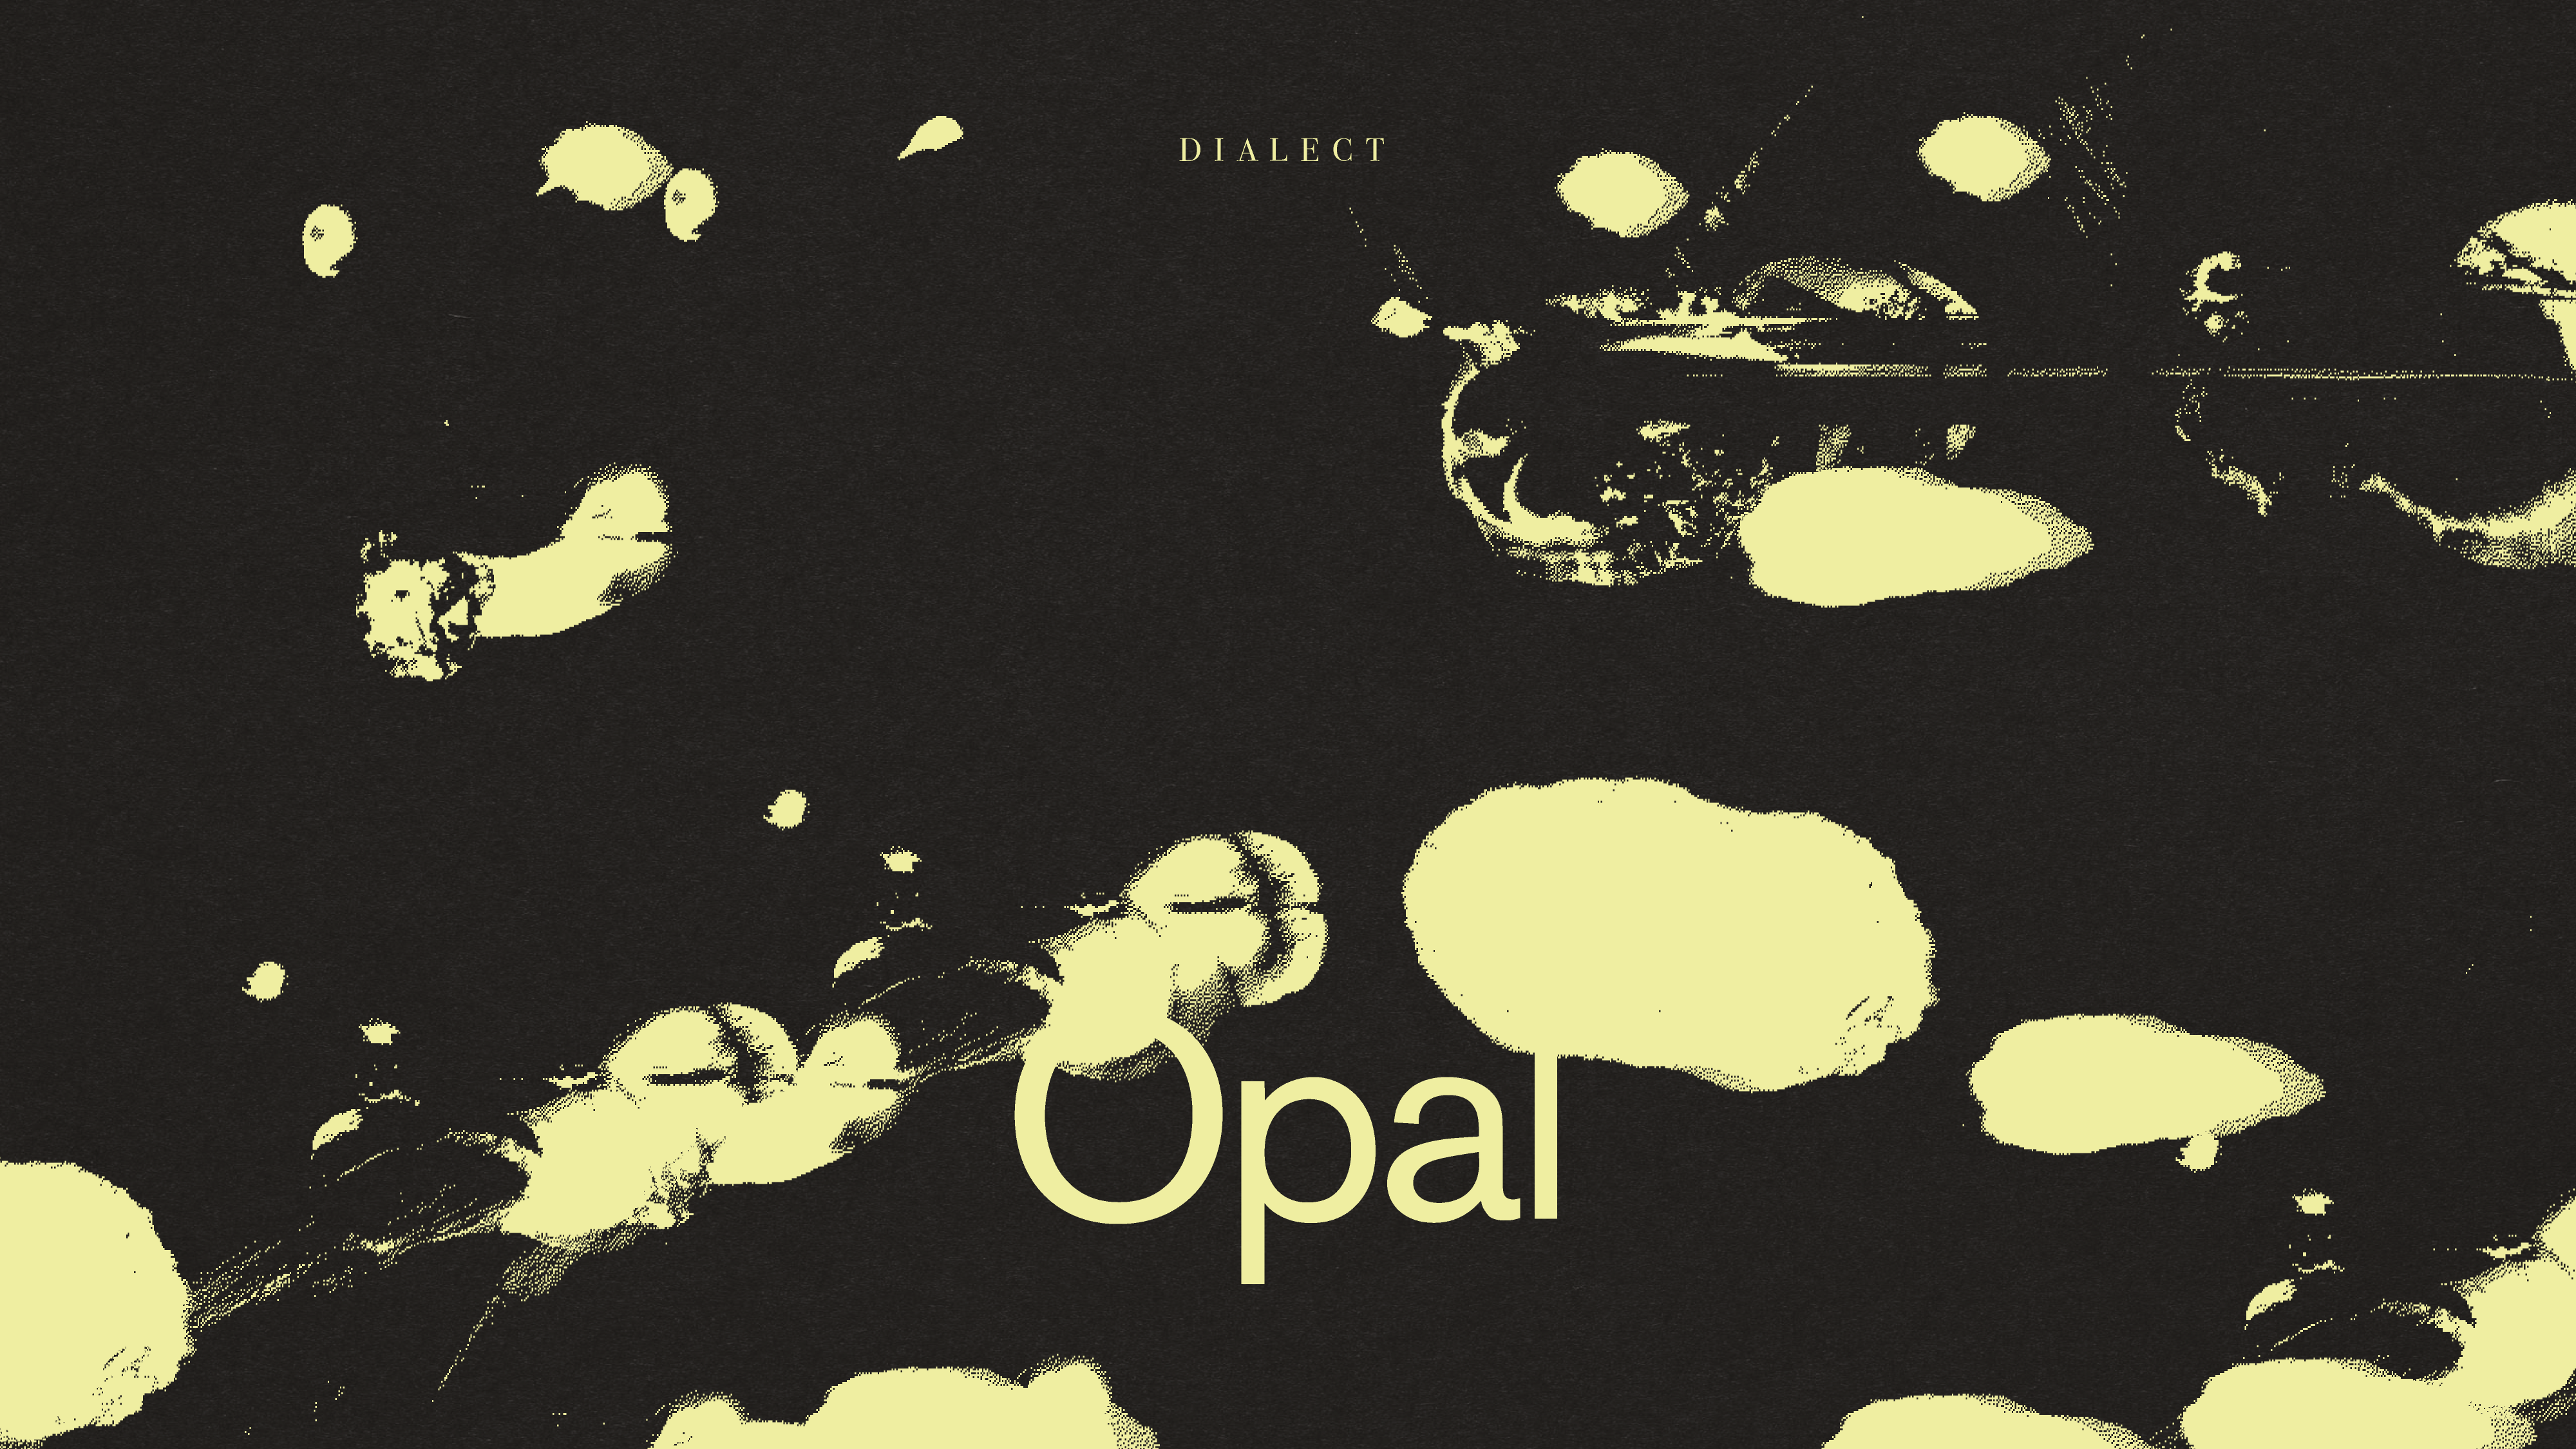 Link to Video for Dialect – Opal